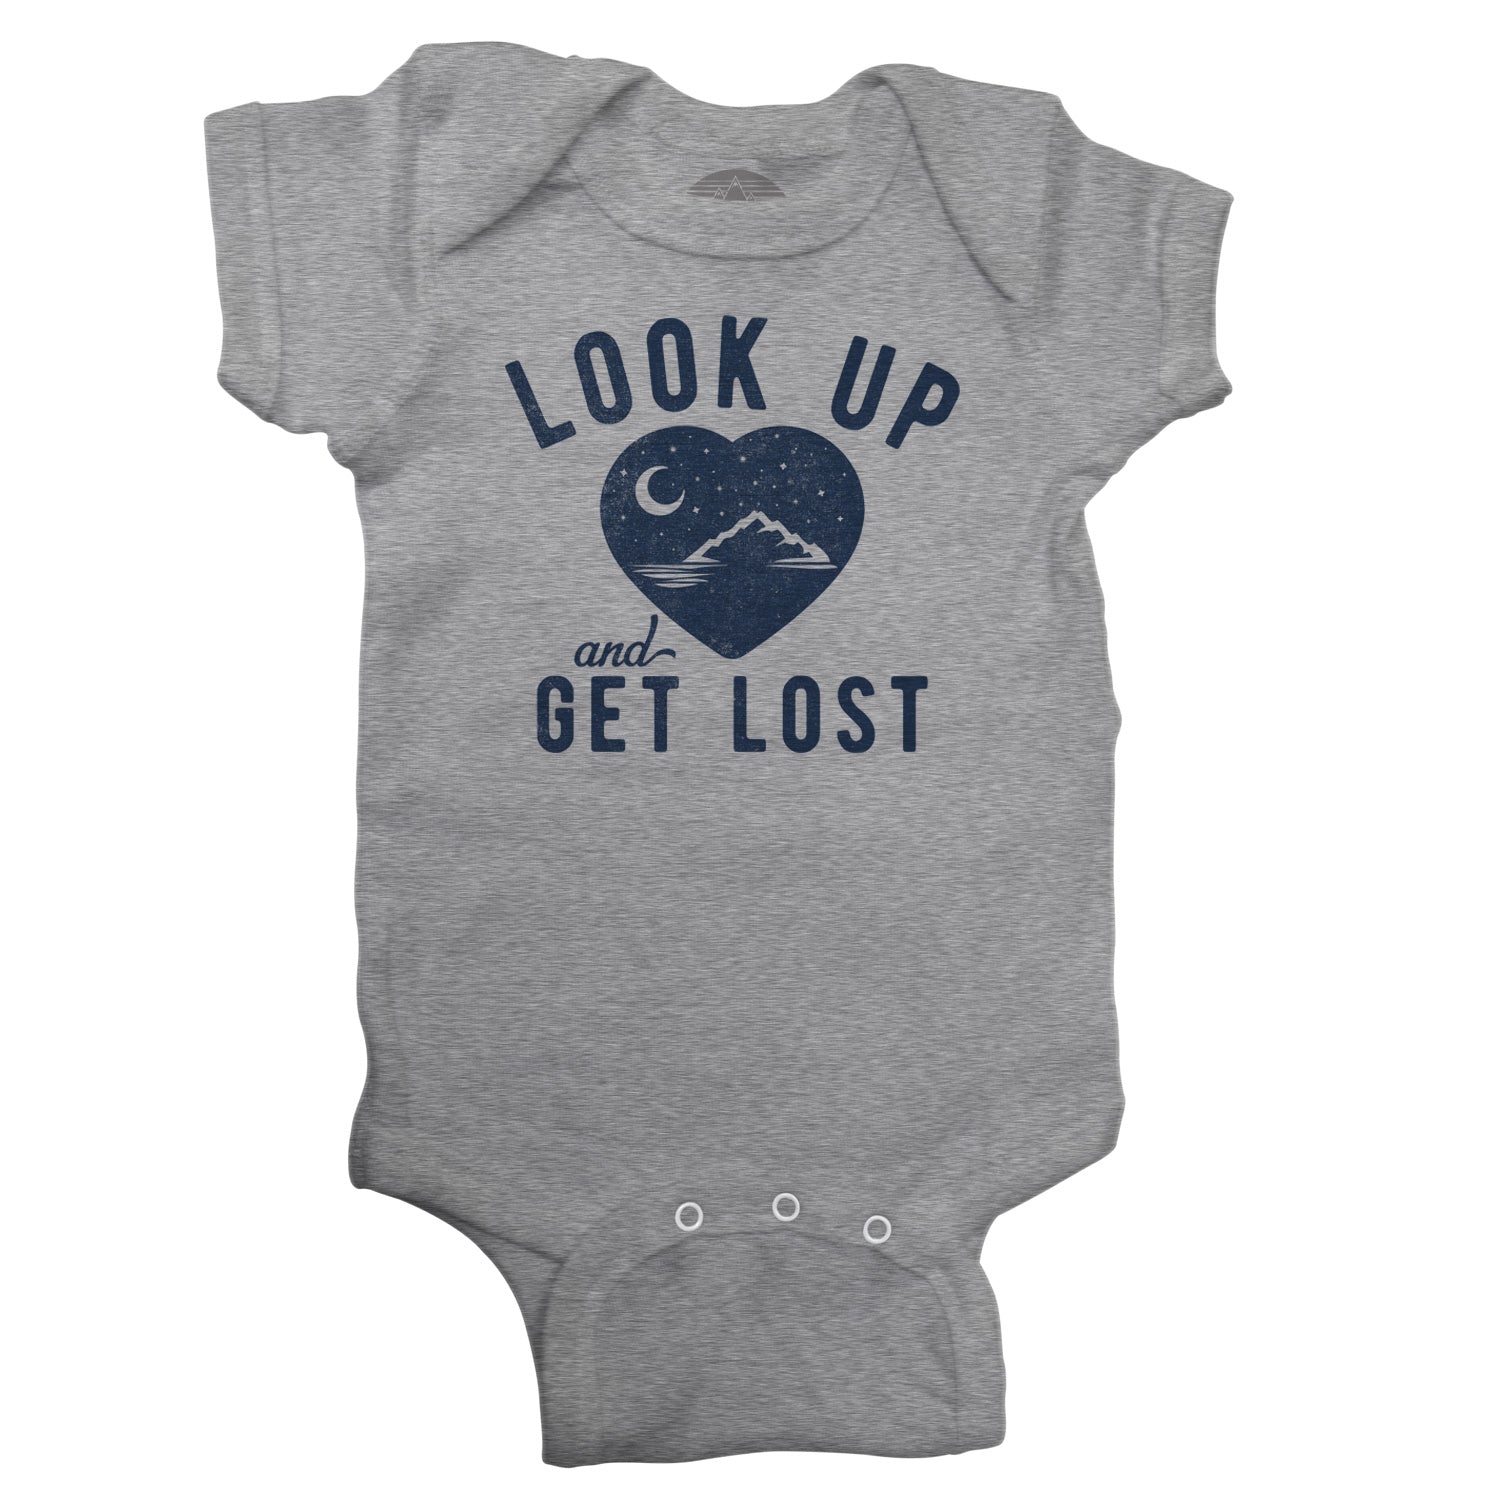 Look Up and Get Lost Infant Bodysuit - Unisex Fit